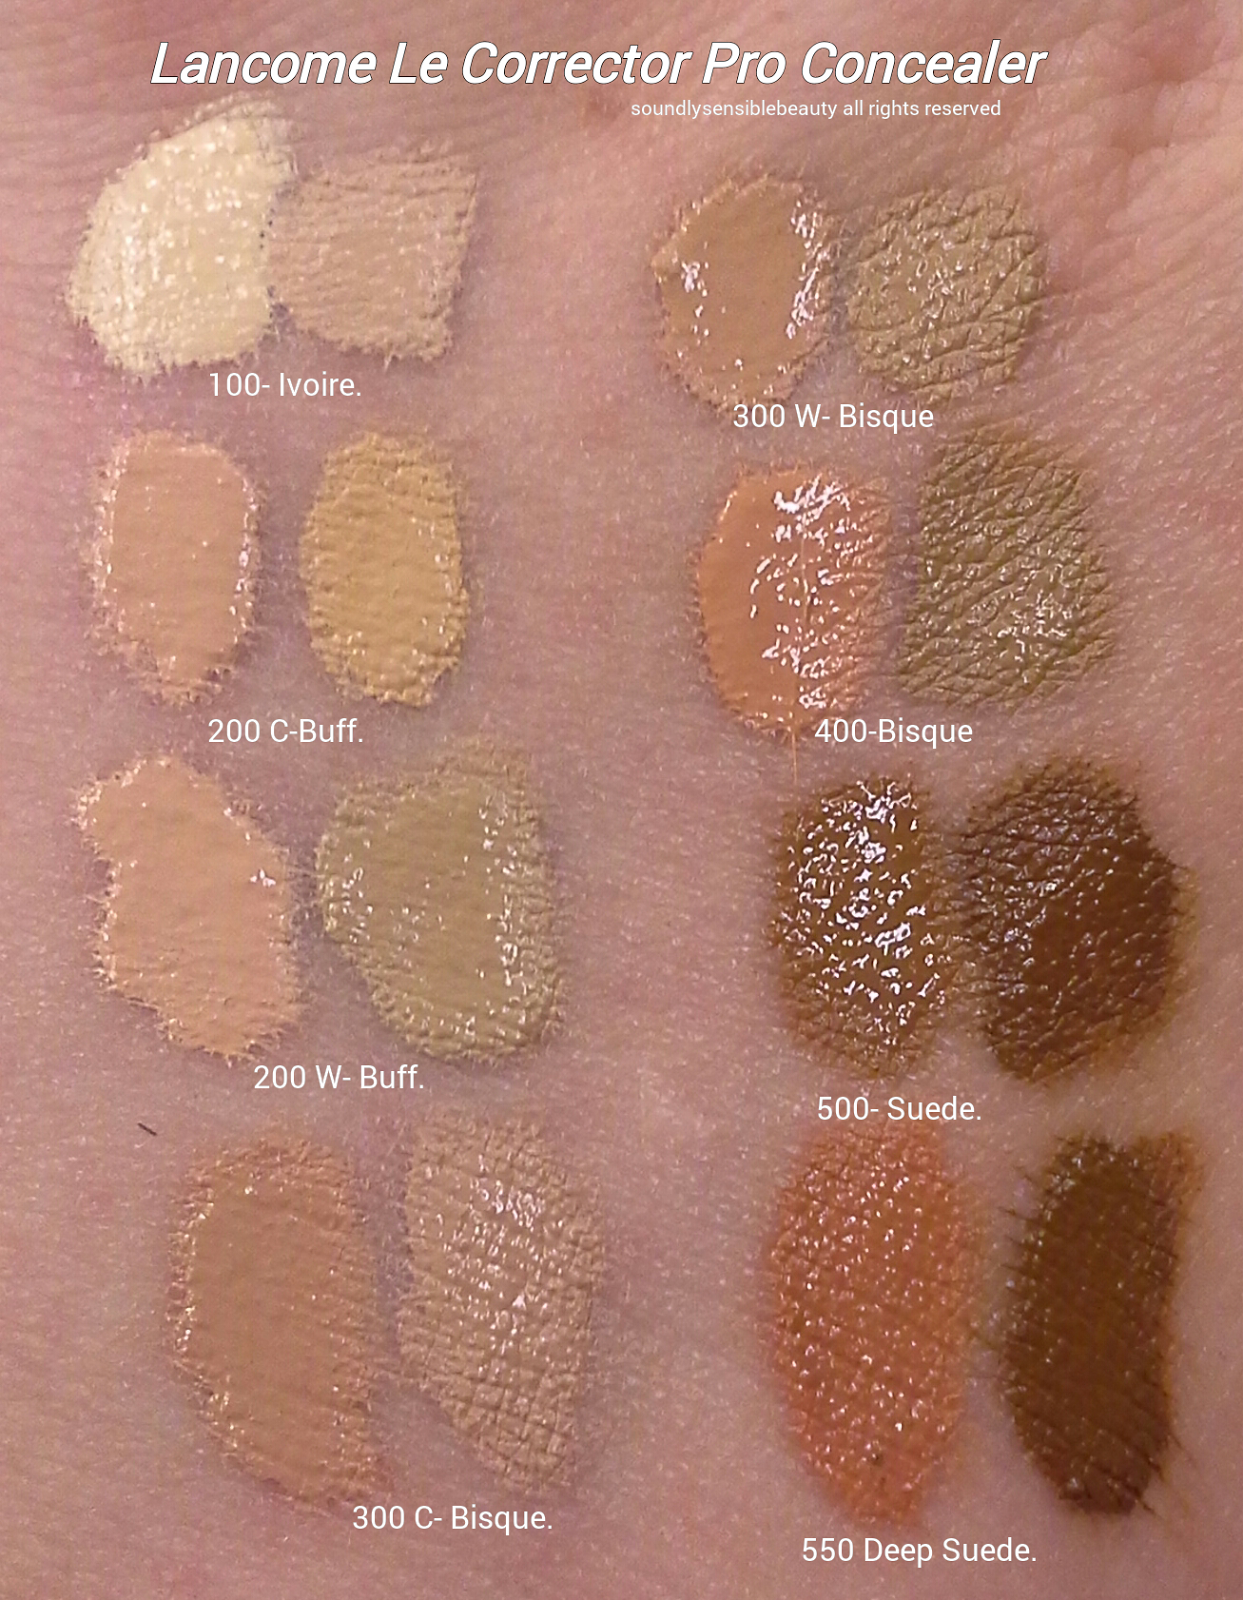 Lancôme Le Corrector Pro Concealer Kit; Review & Swatches of Shades